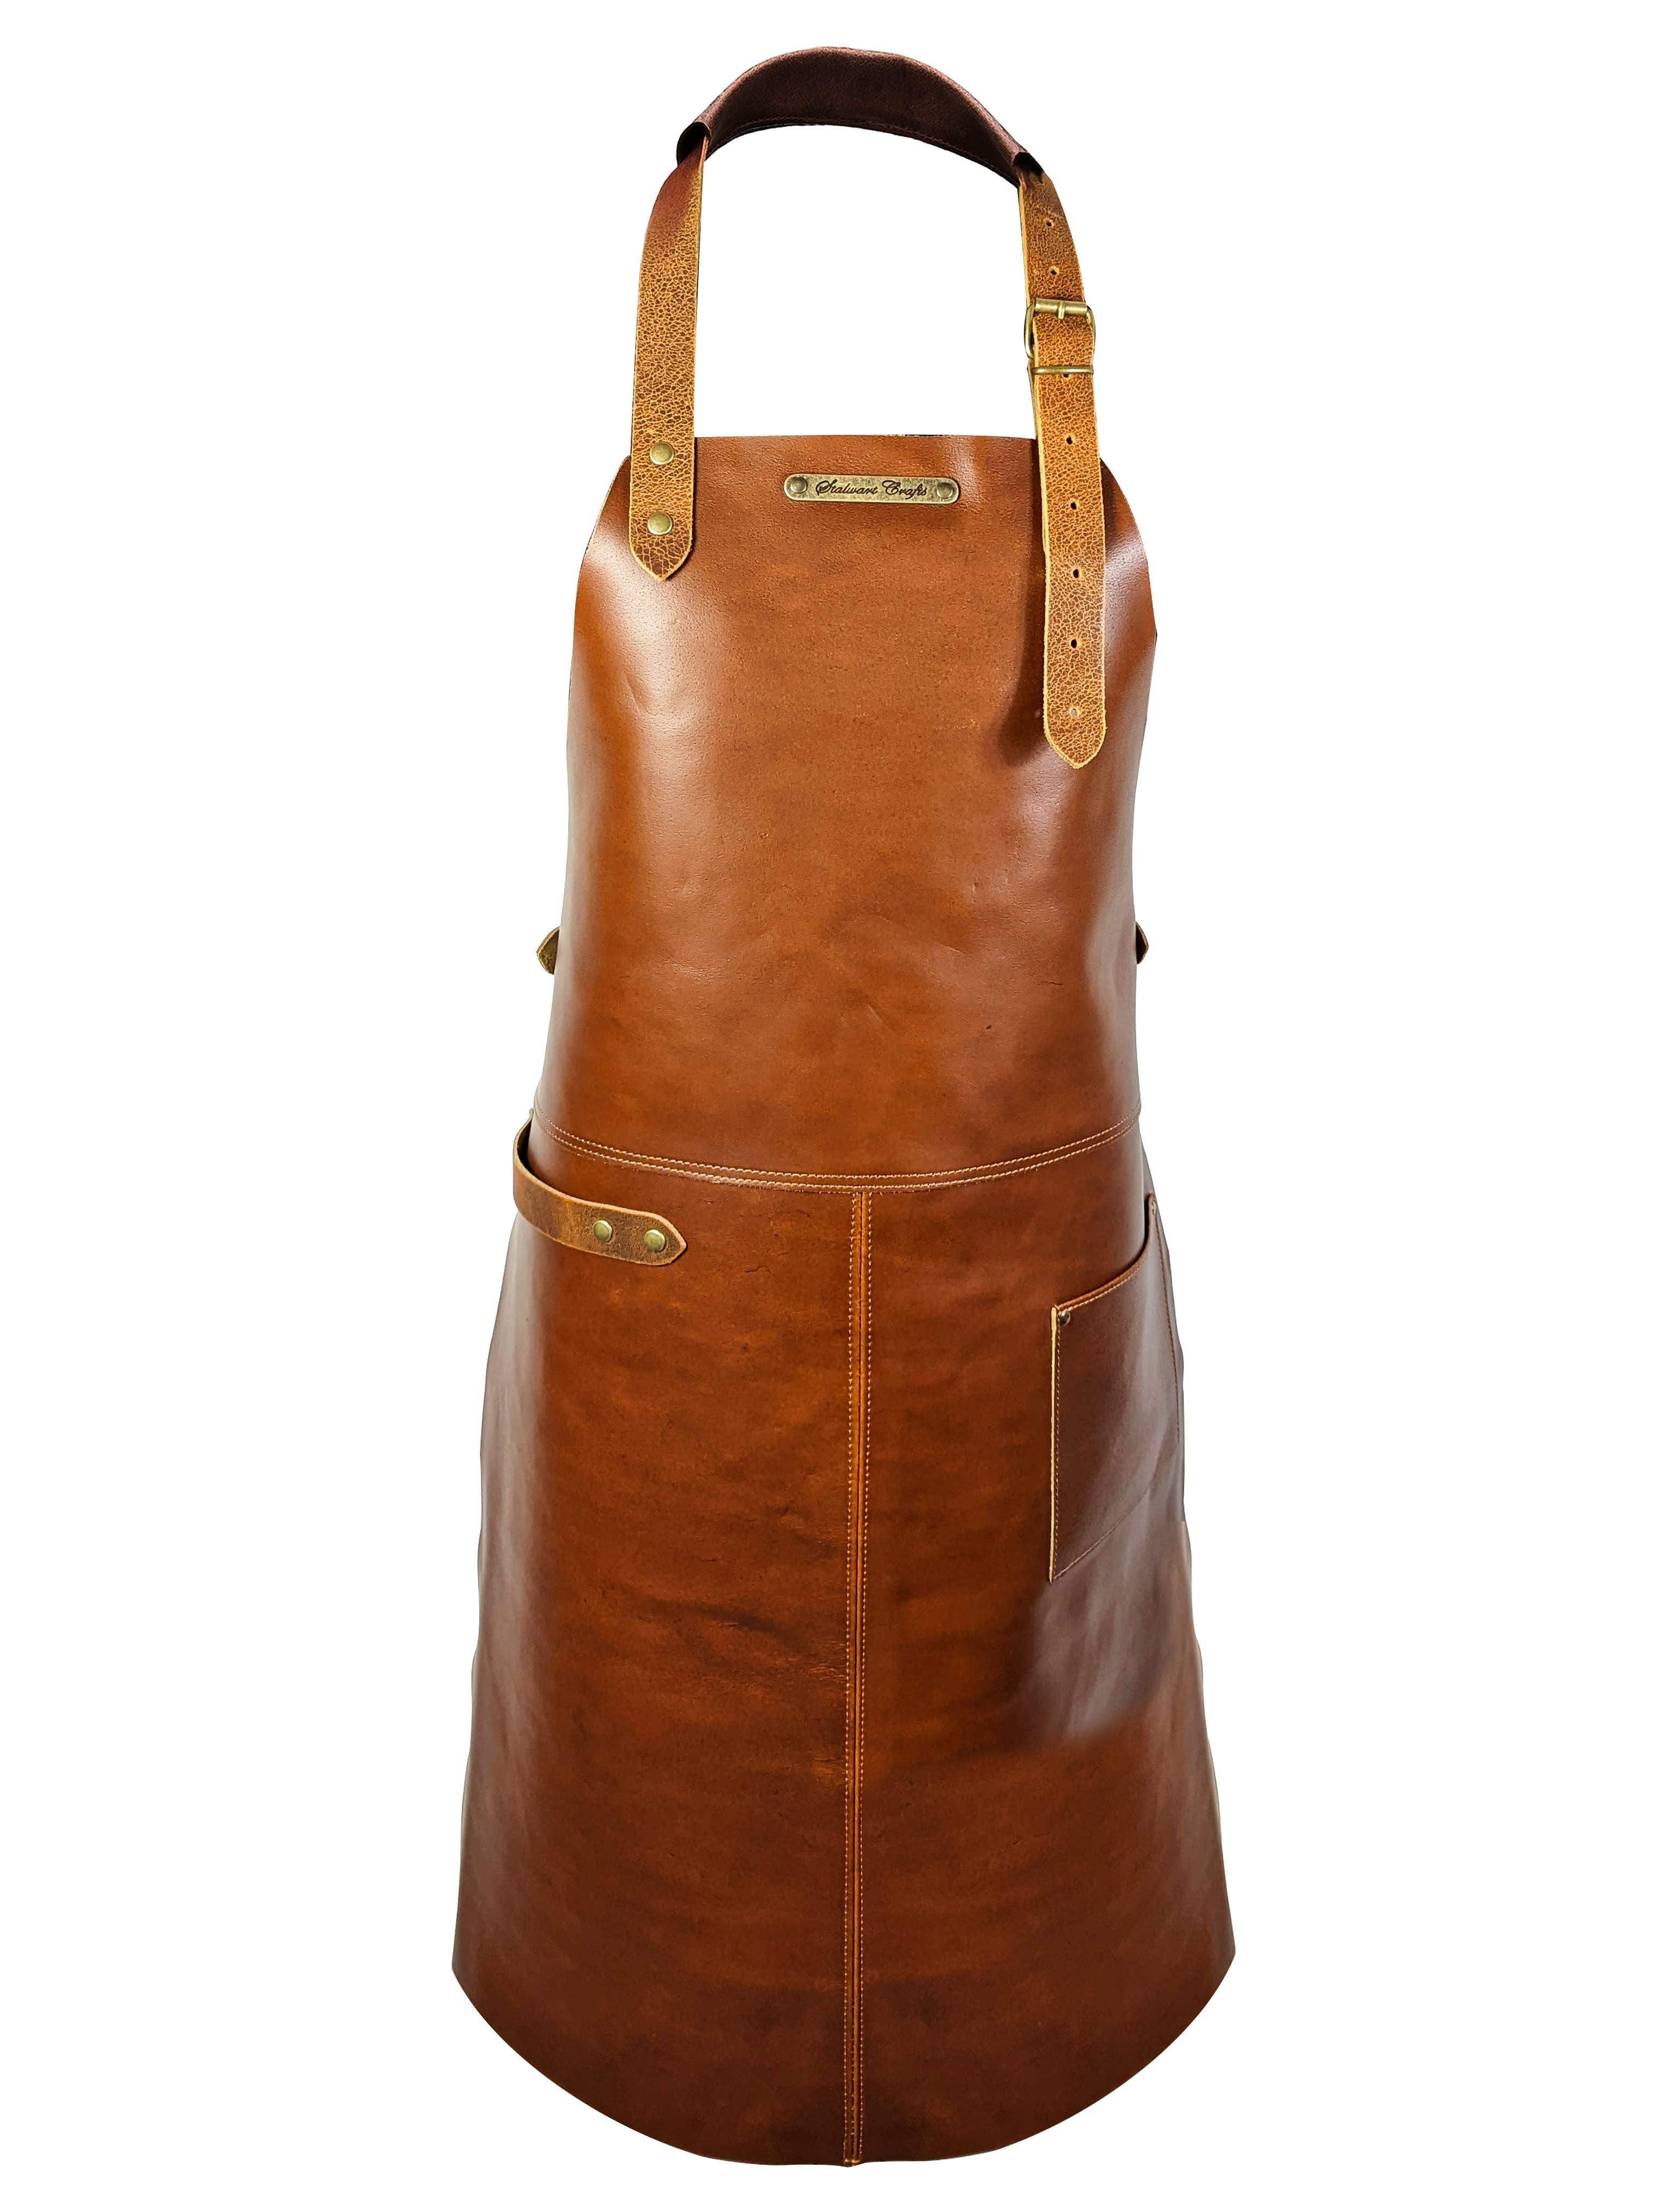 Stalwart Crafts Deluxe Leather Cross Strap Apron w/ Pocket - Brown